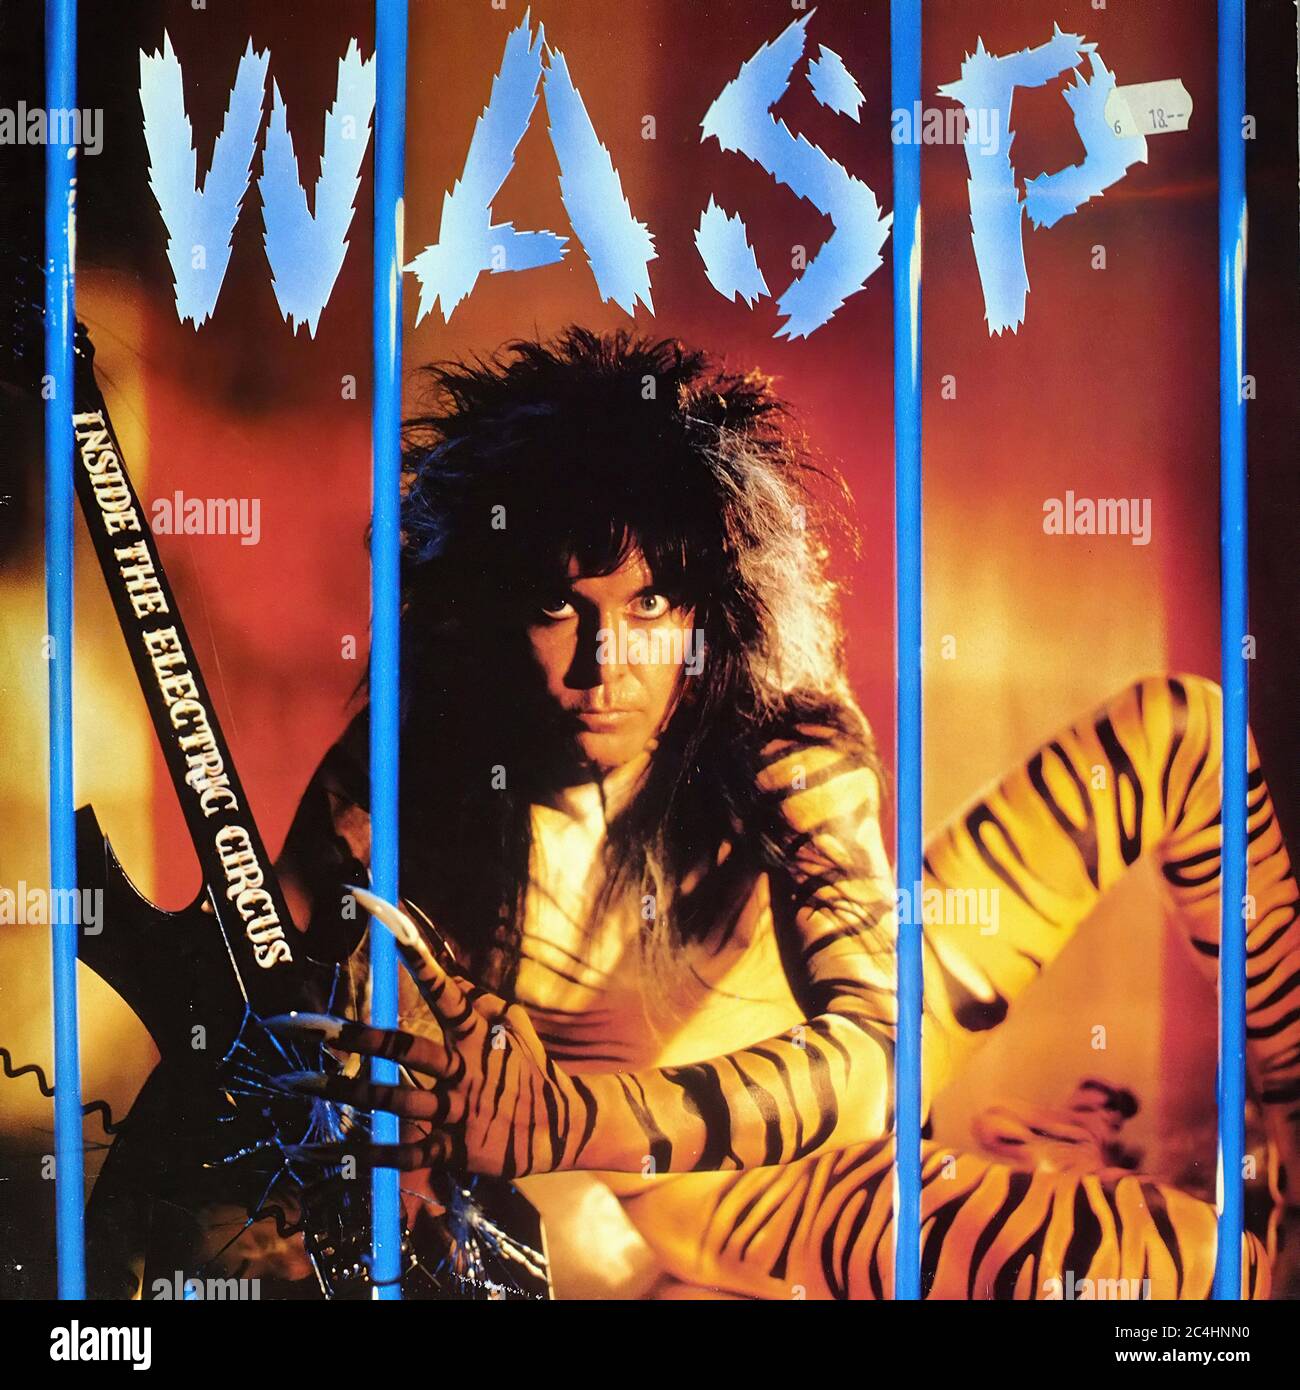 W.a.S.P Inside the Electric Circus 12'' Lp Vinyl - Vintage Record Cover Stock Photo